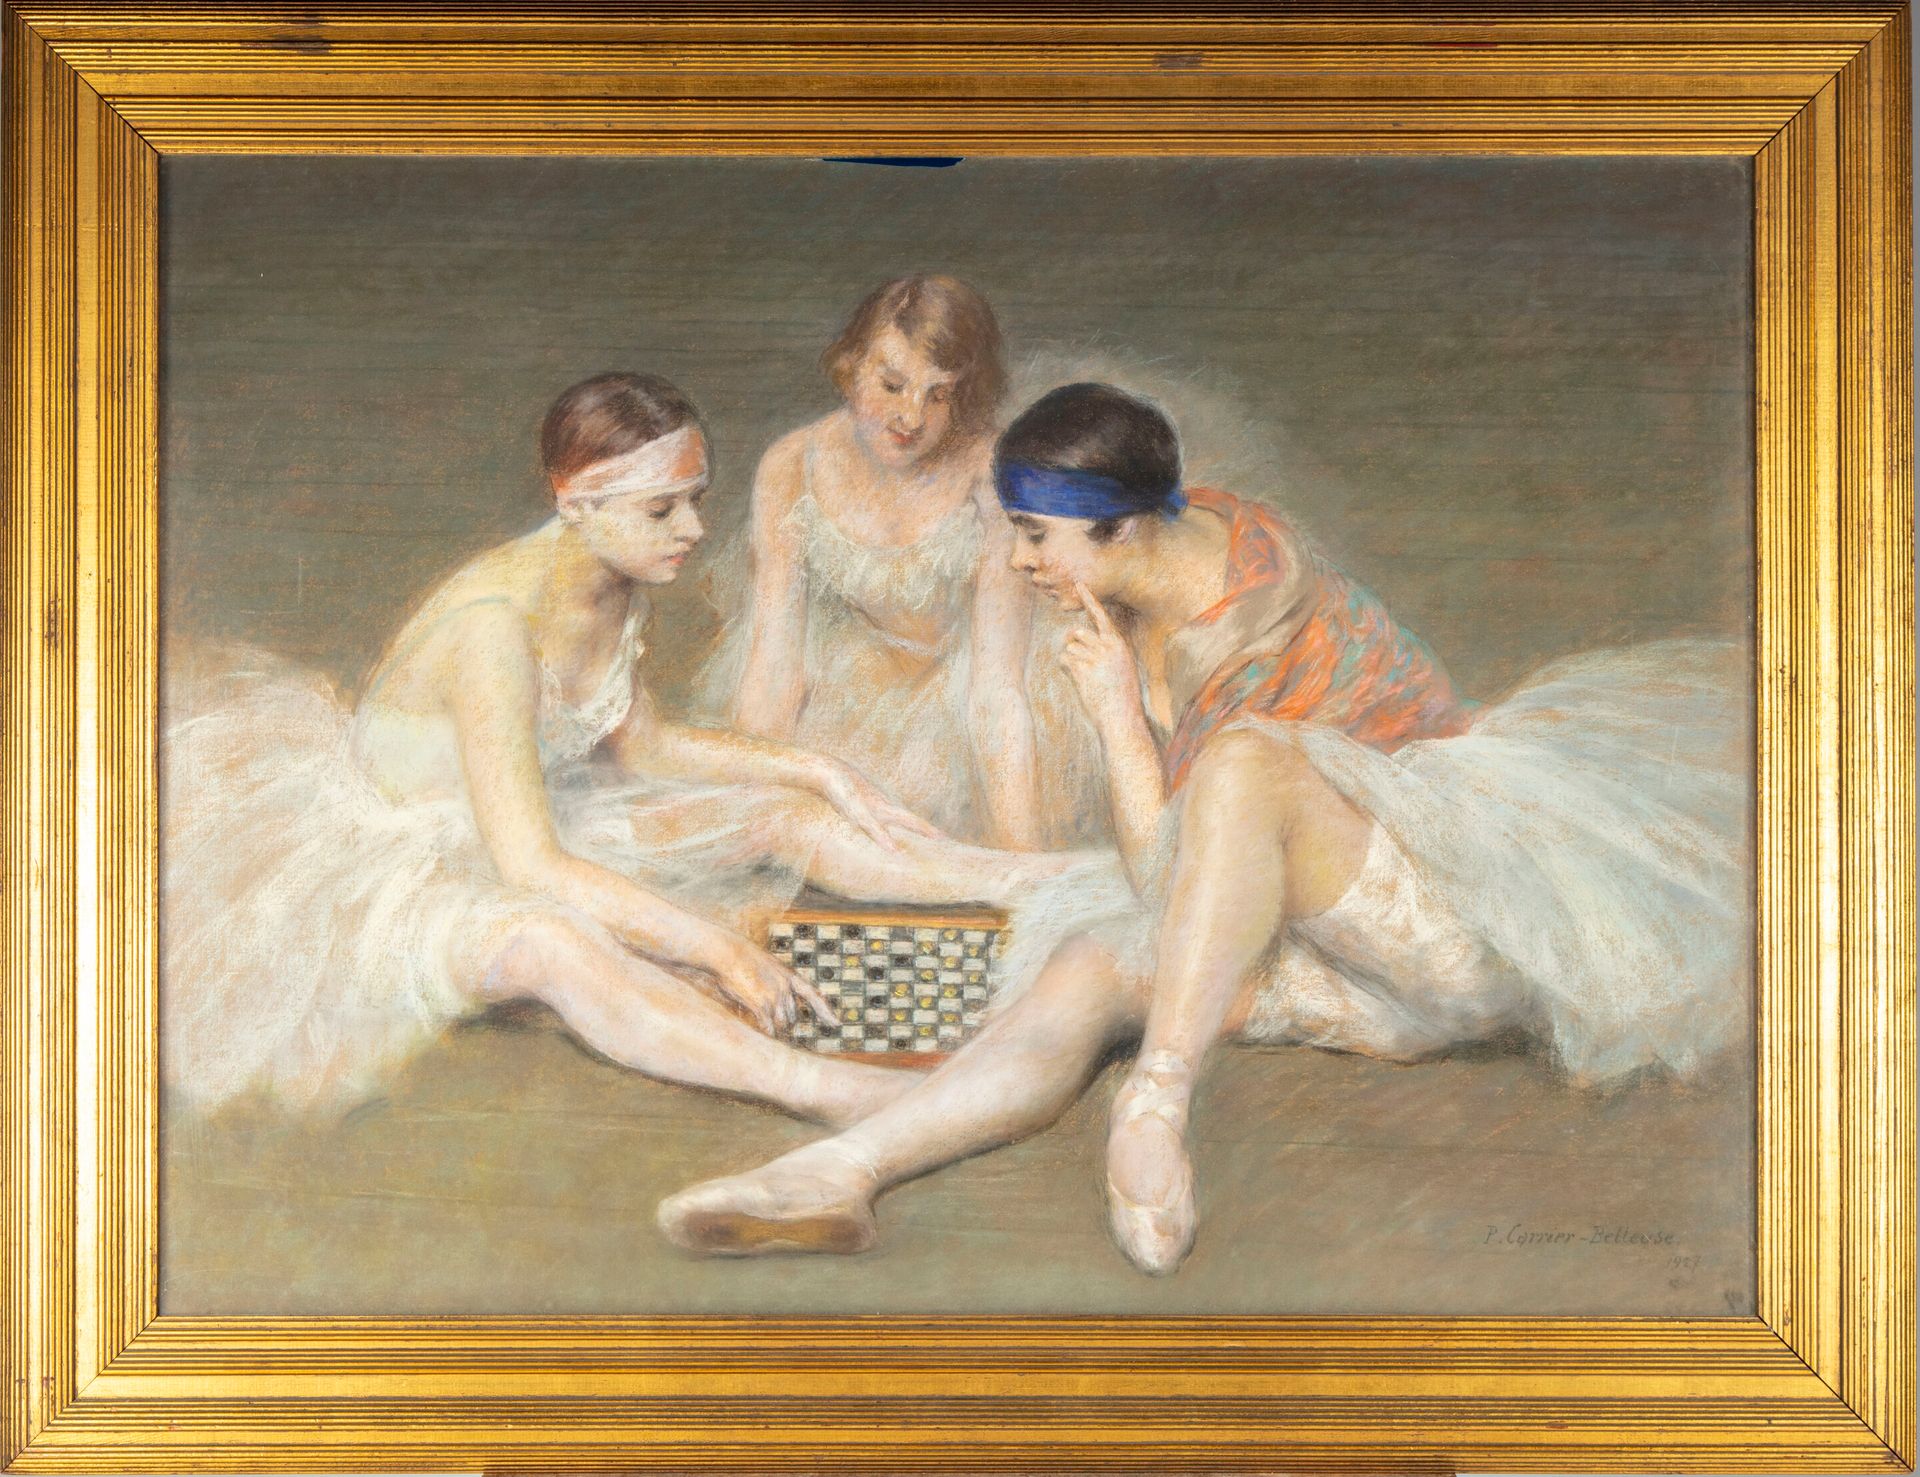 CARRIER-BELLEUSE Pierre CARRIER-BELLEUSE (1851-1932)

Dancers playing checkers

&hellip;